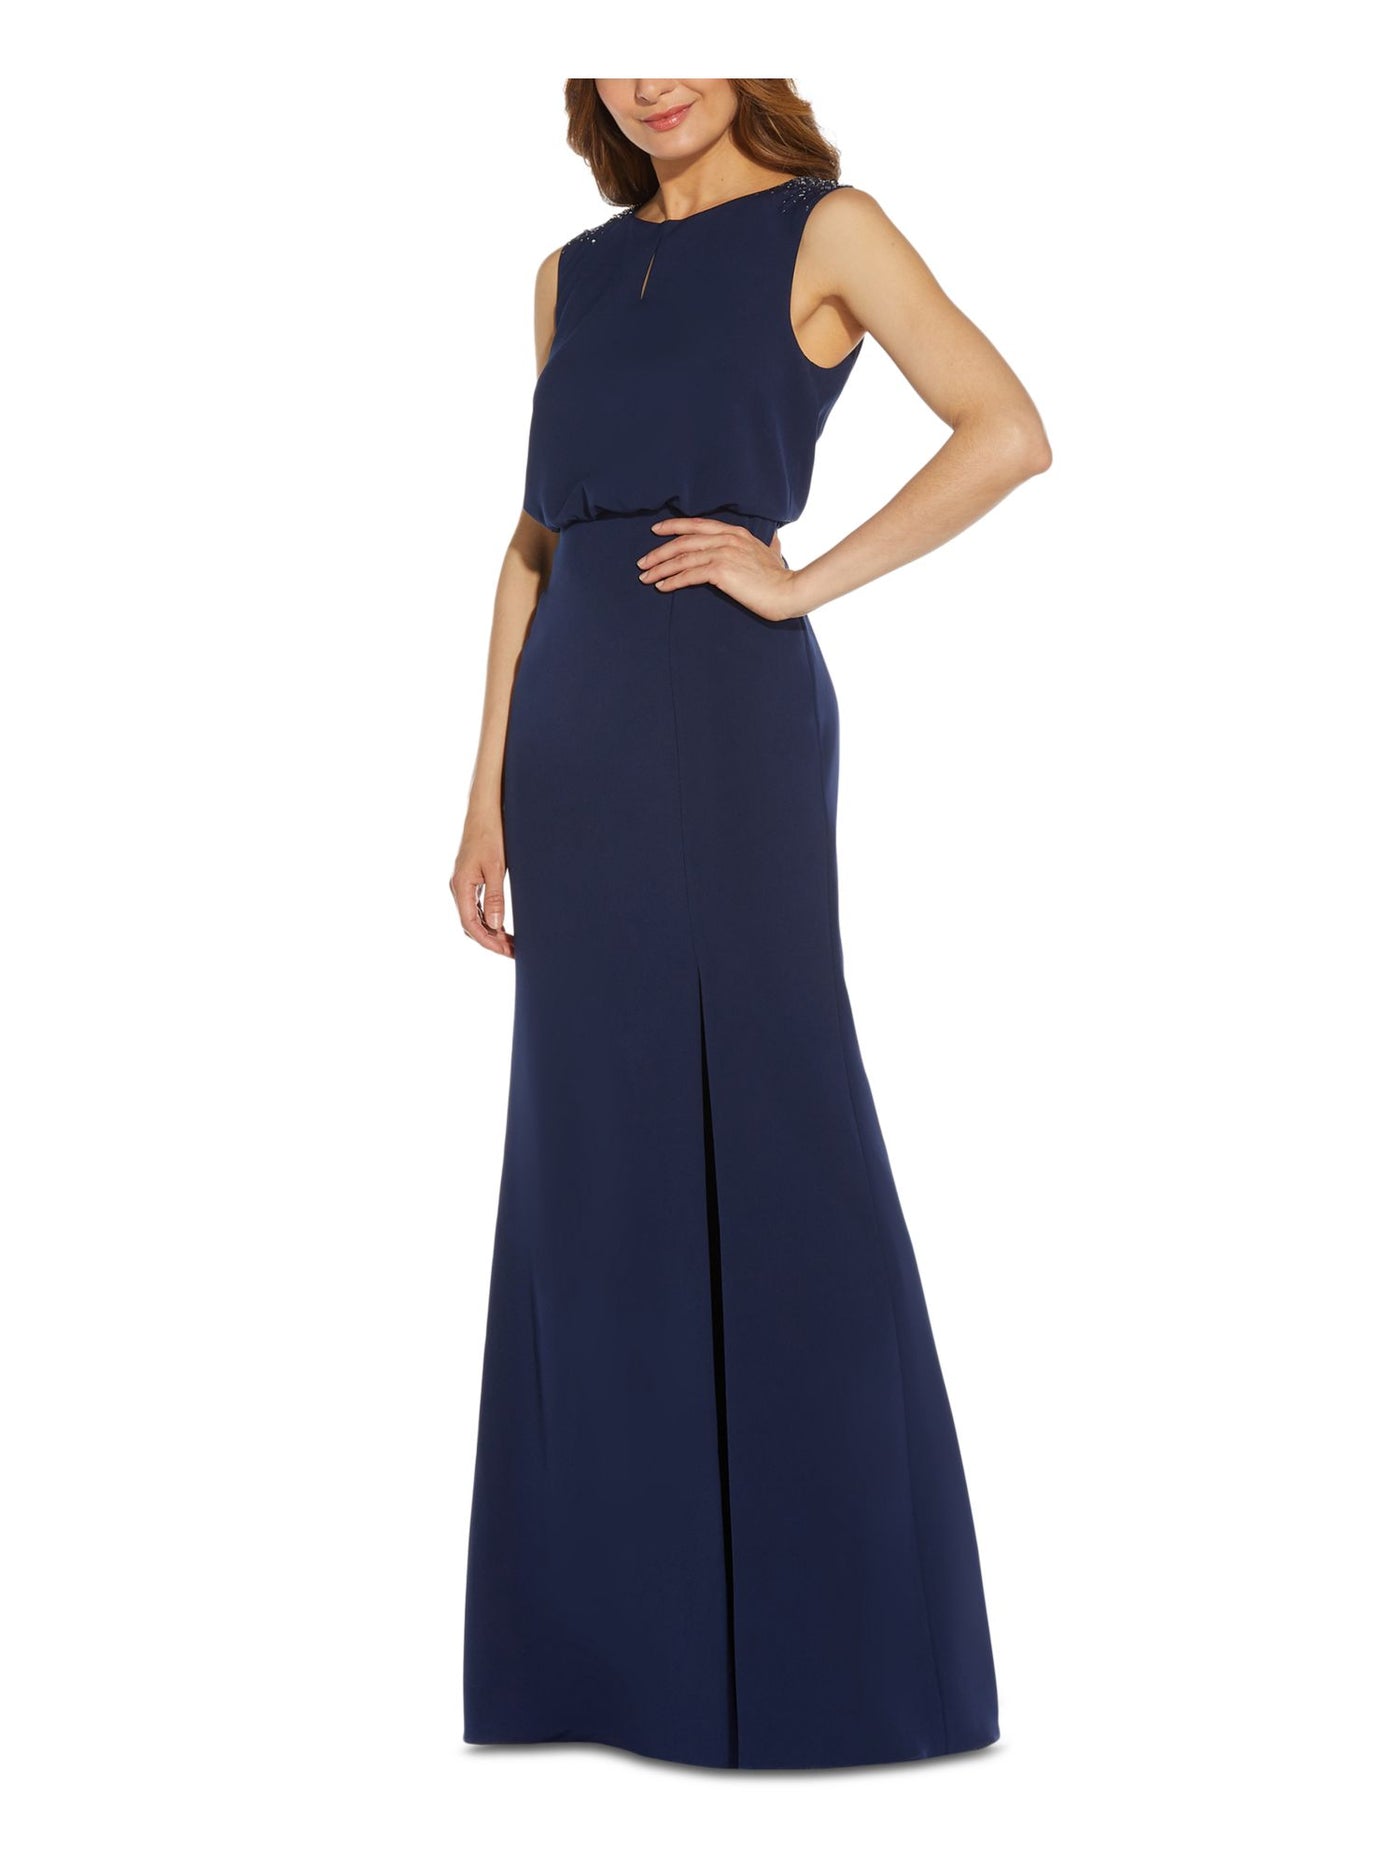 ADRIANNA PAPELL Womens Navy Stretch Embellished Slitted Keyhole Zippered Lined Sleeveless Boat Neck Maxi Formal Blouson Dress 2